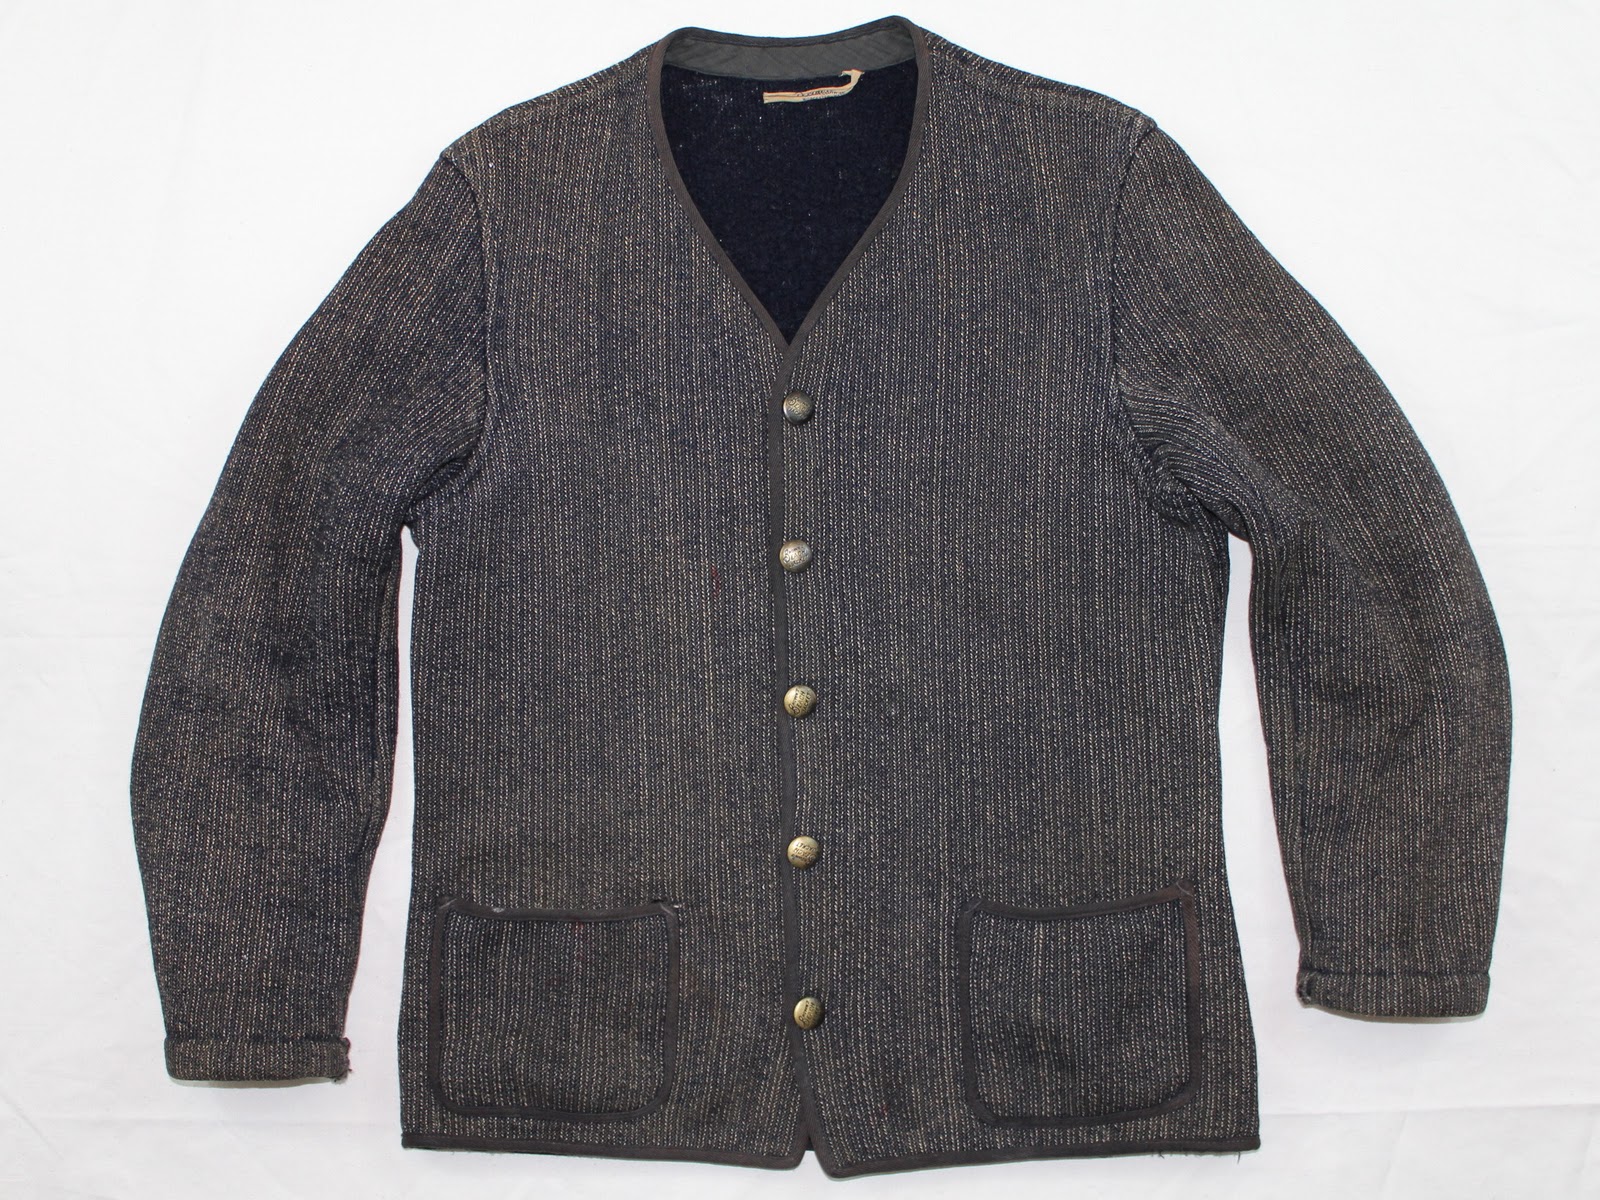 vintage workwear: Brown's Beach Jacket - Union Made in America